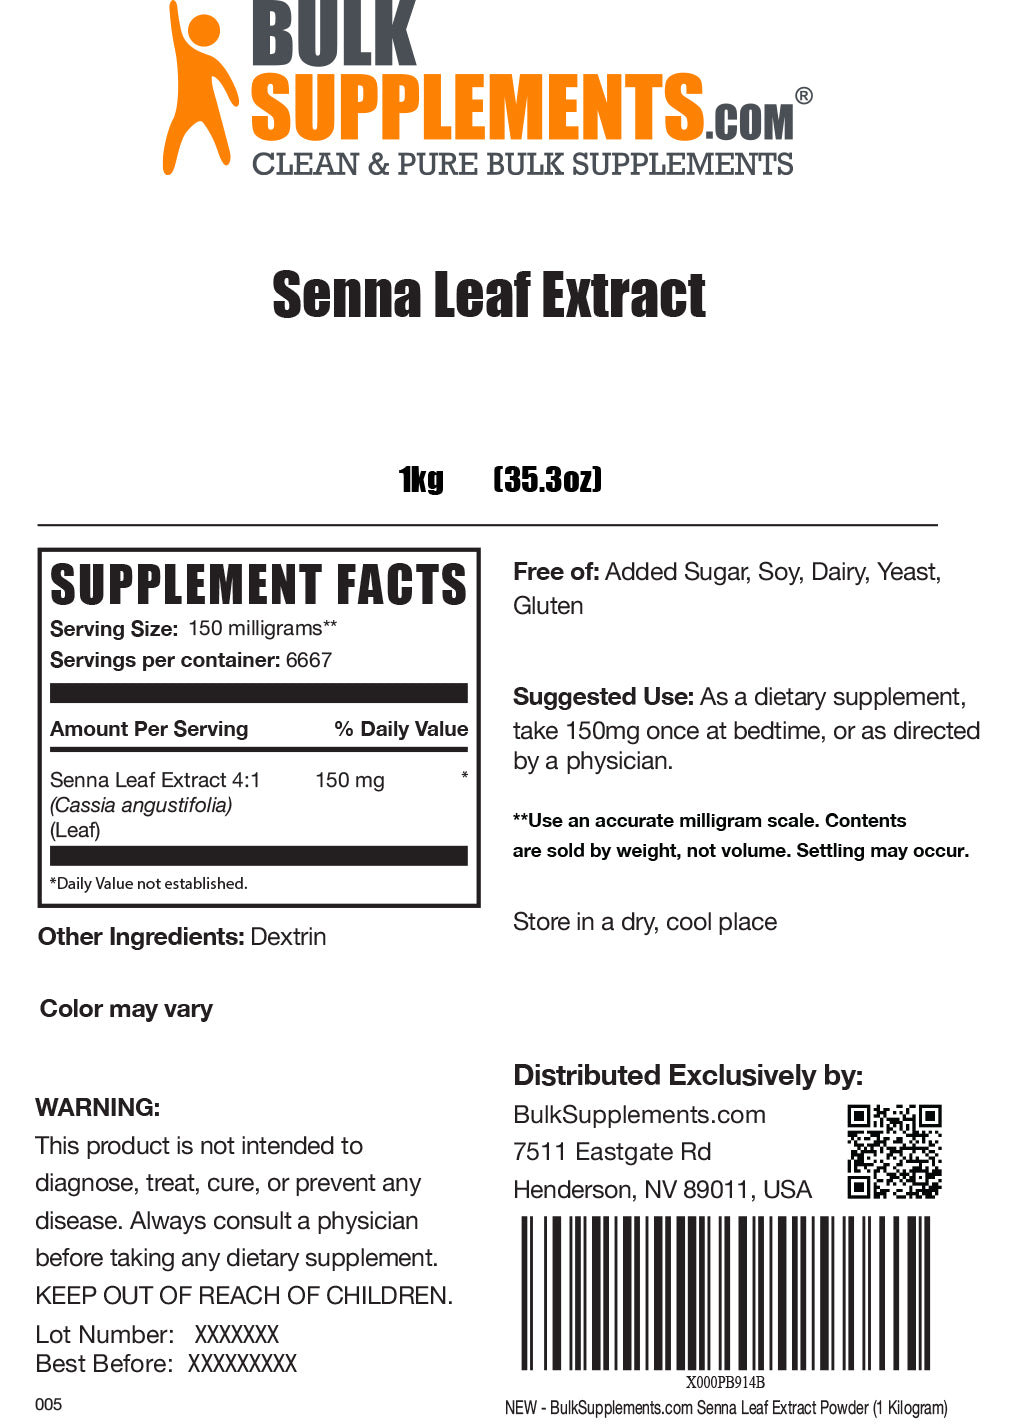 Supplement Facts Rosehip Extract